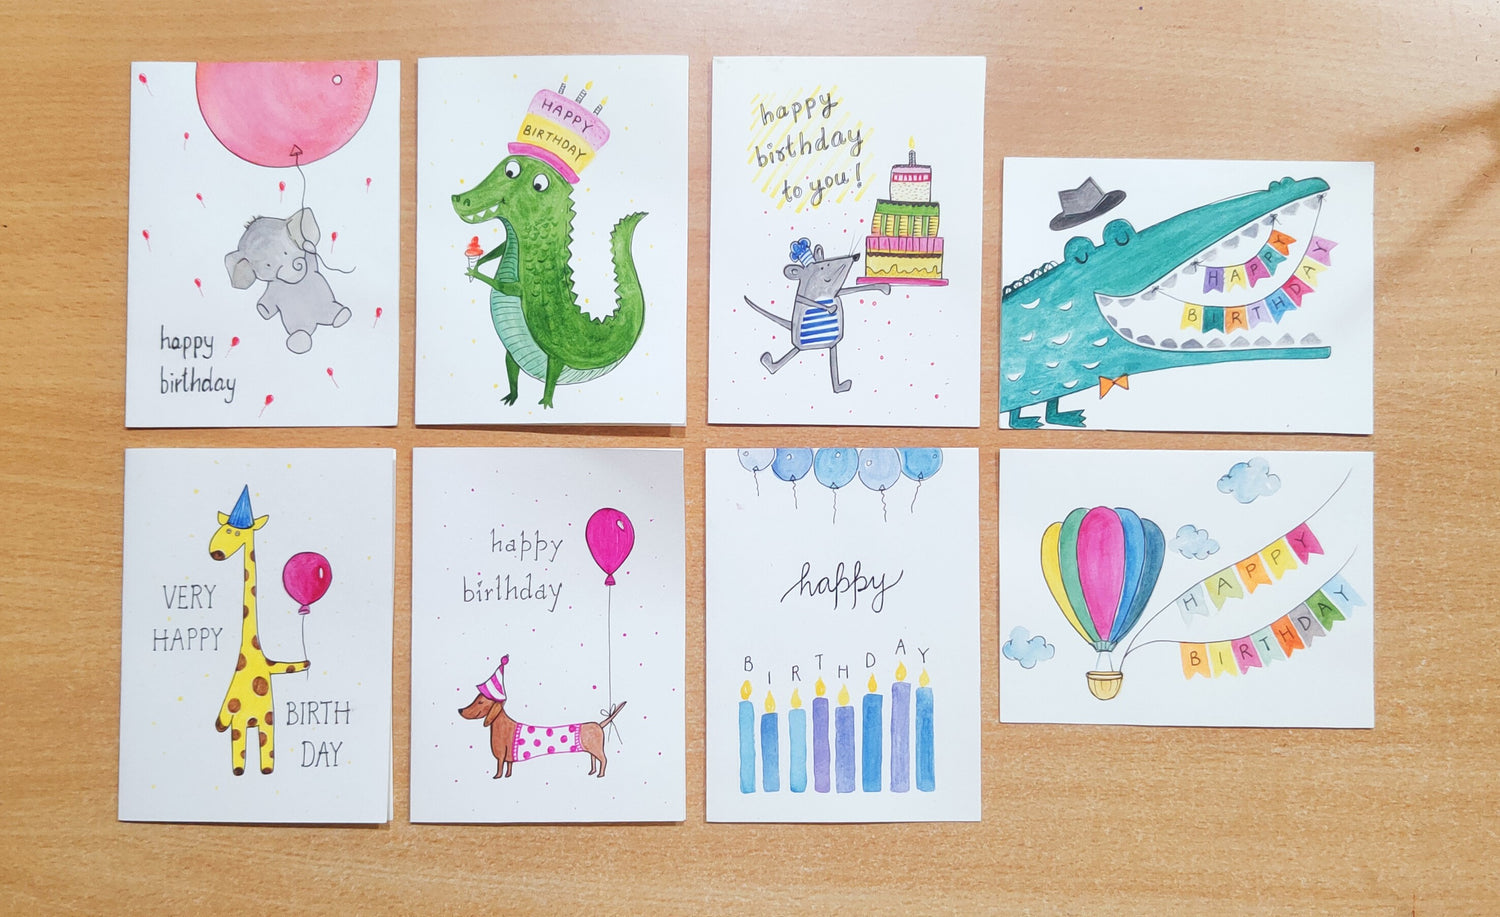 Birthday Cards- Hand-painted